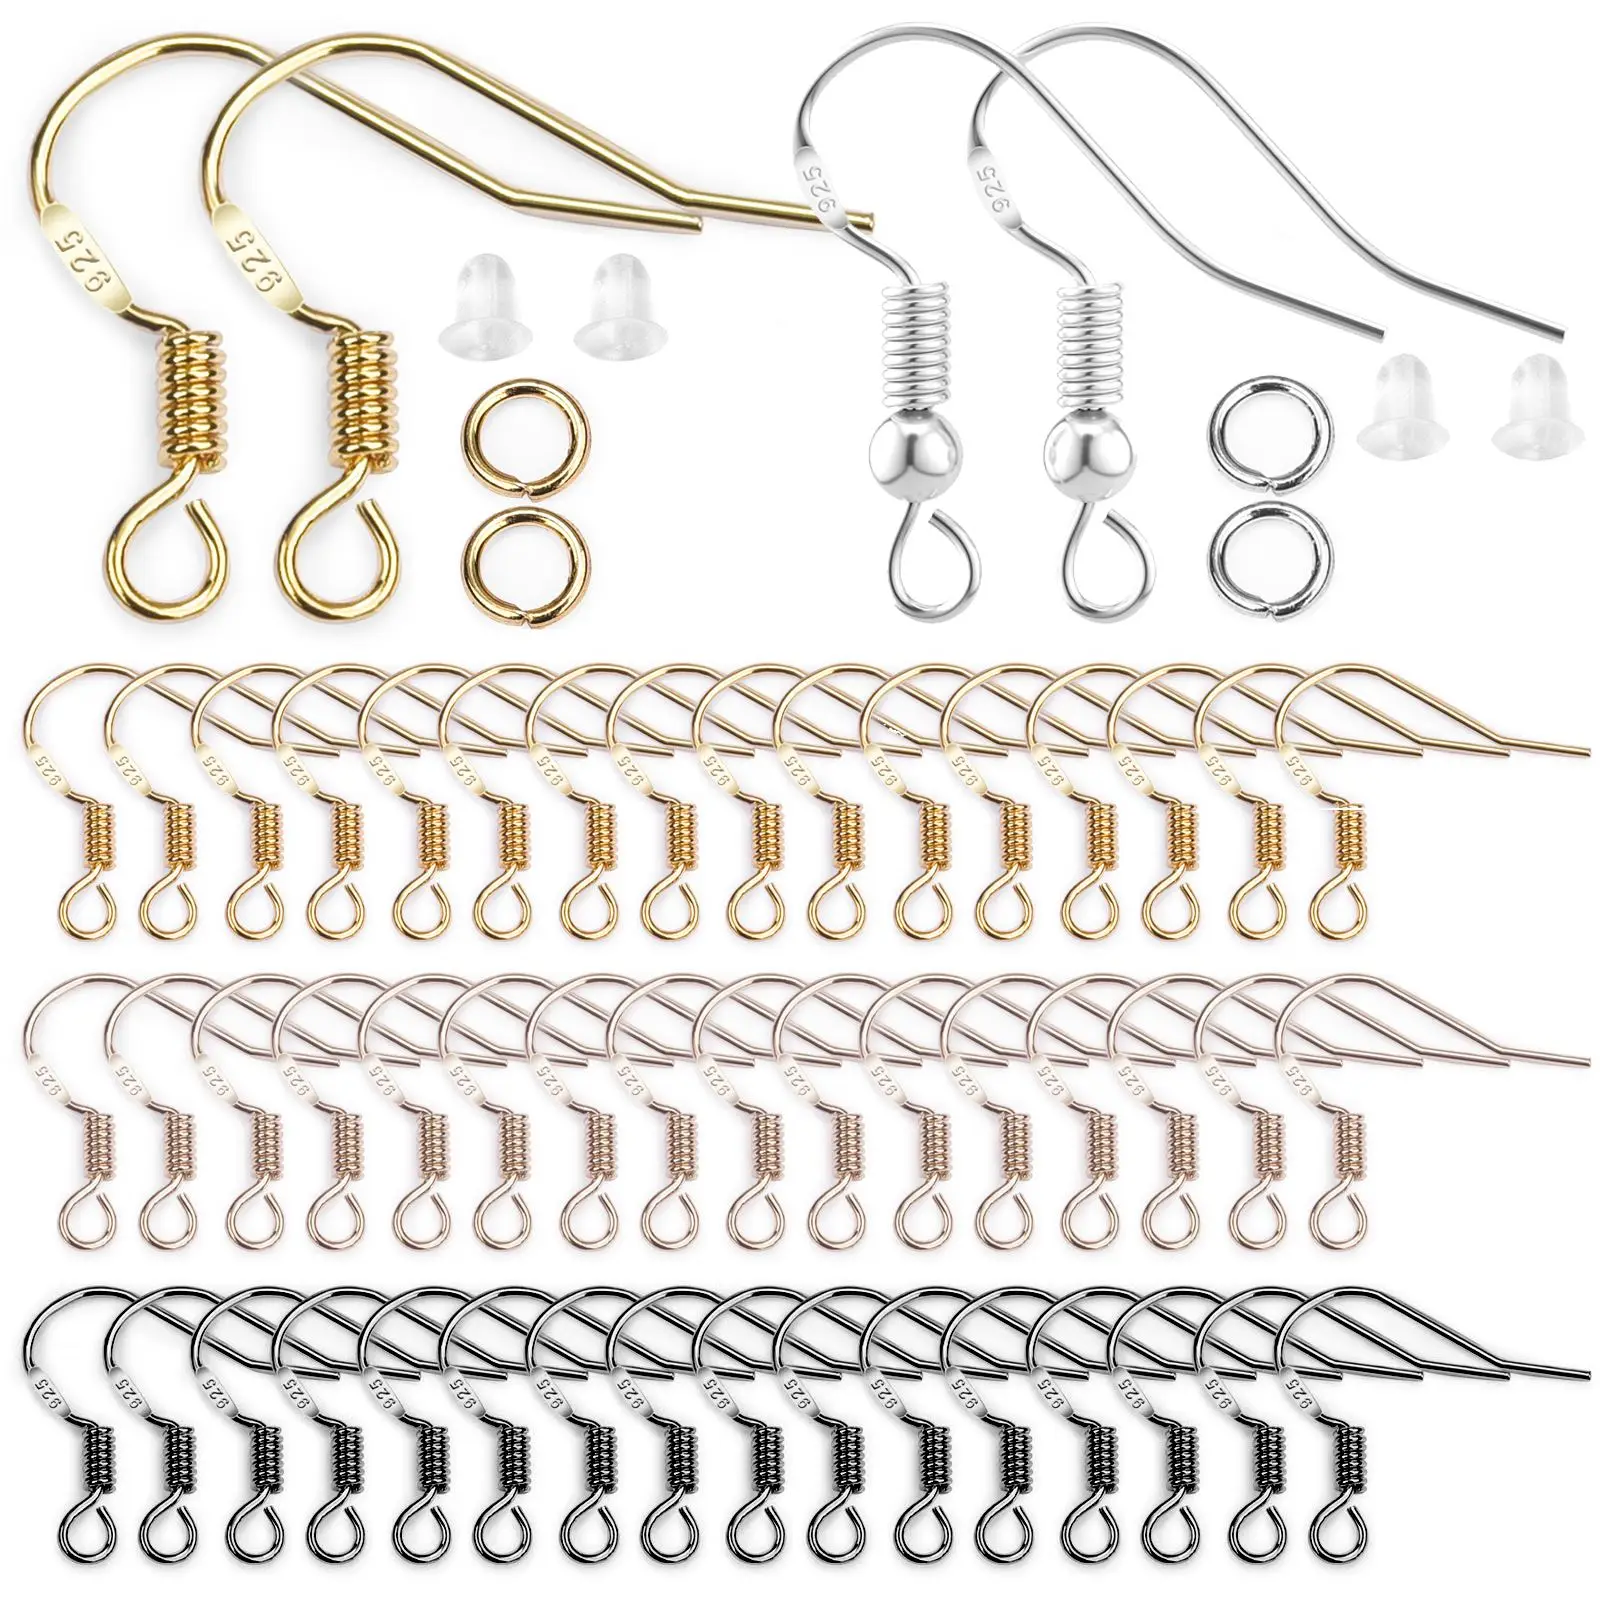 Share more than 208 earring hooks and jump rings best